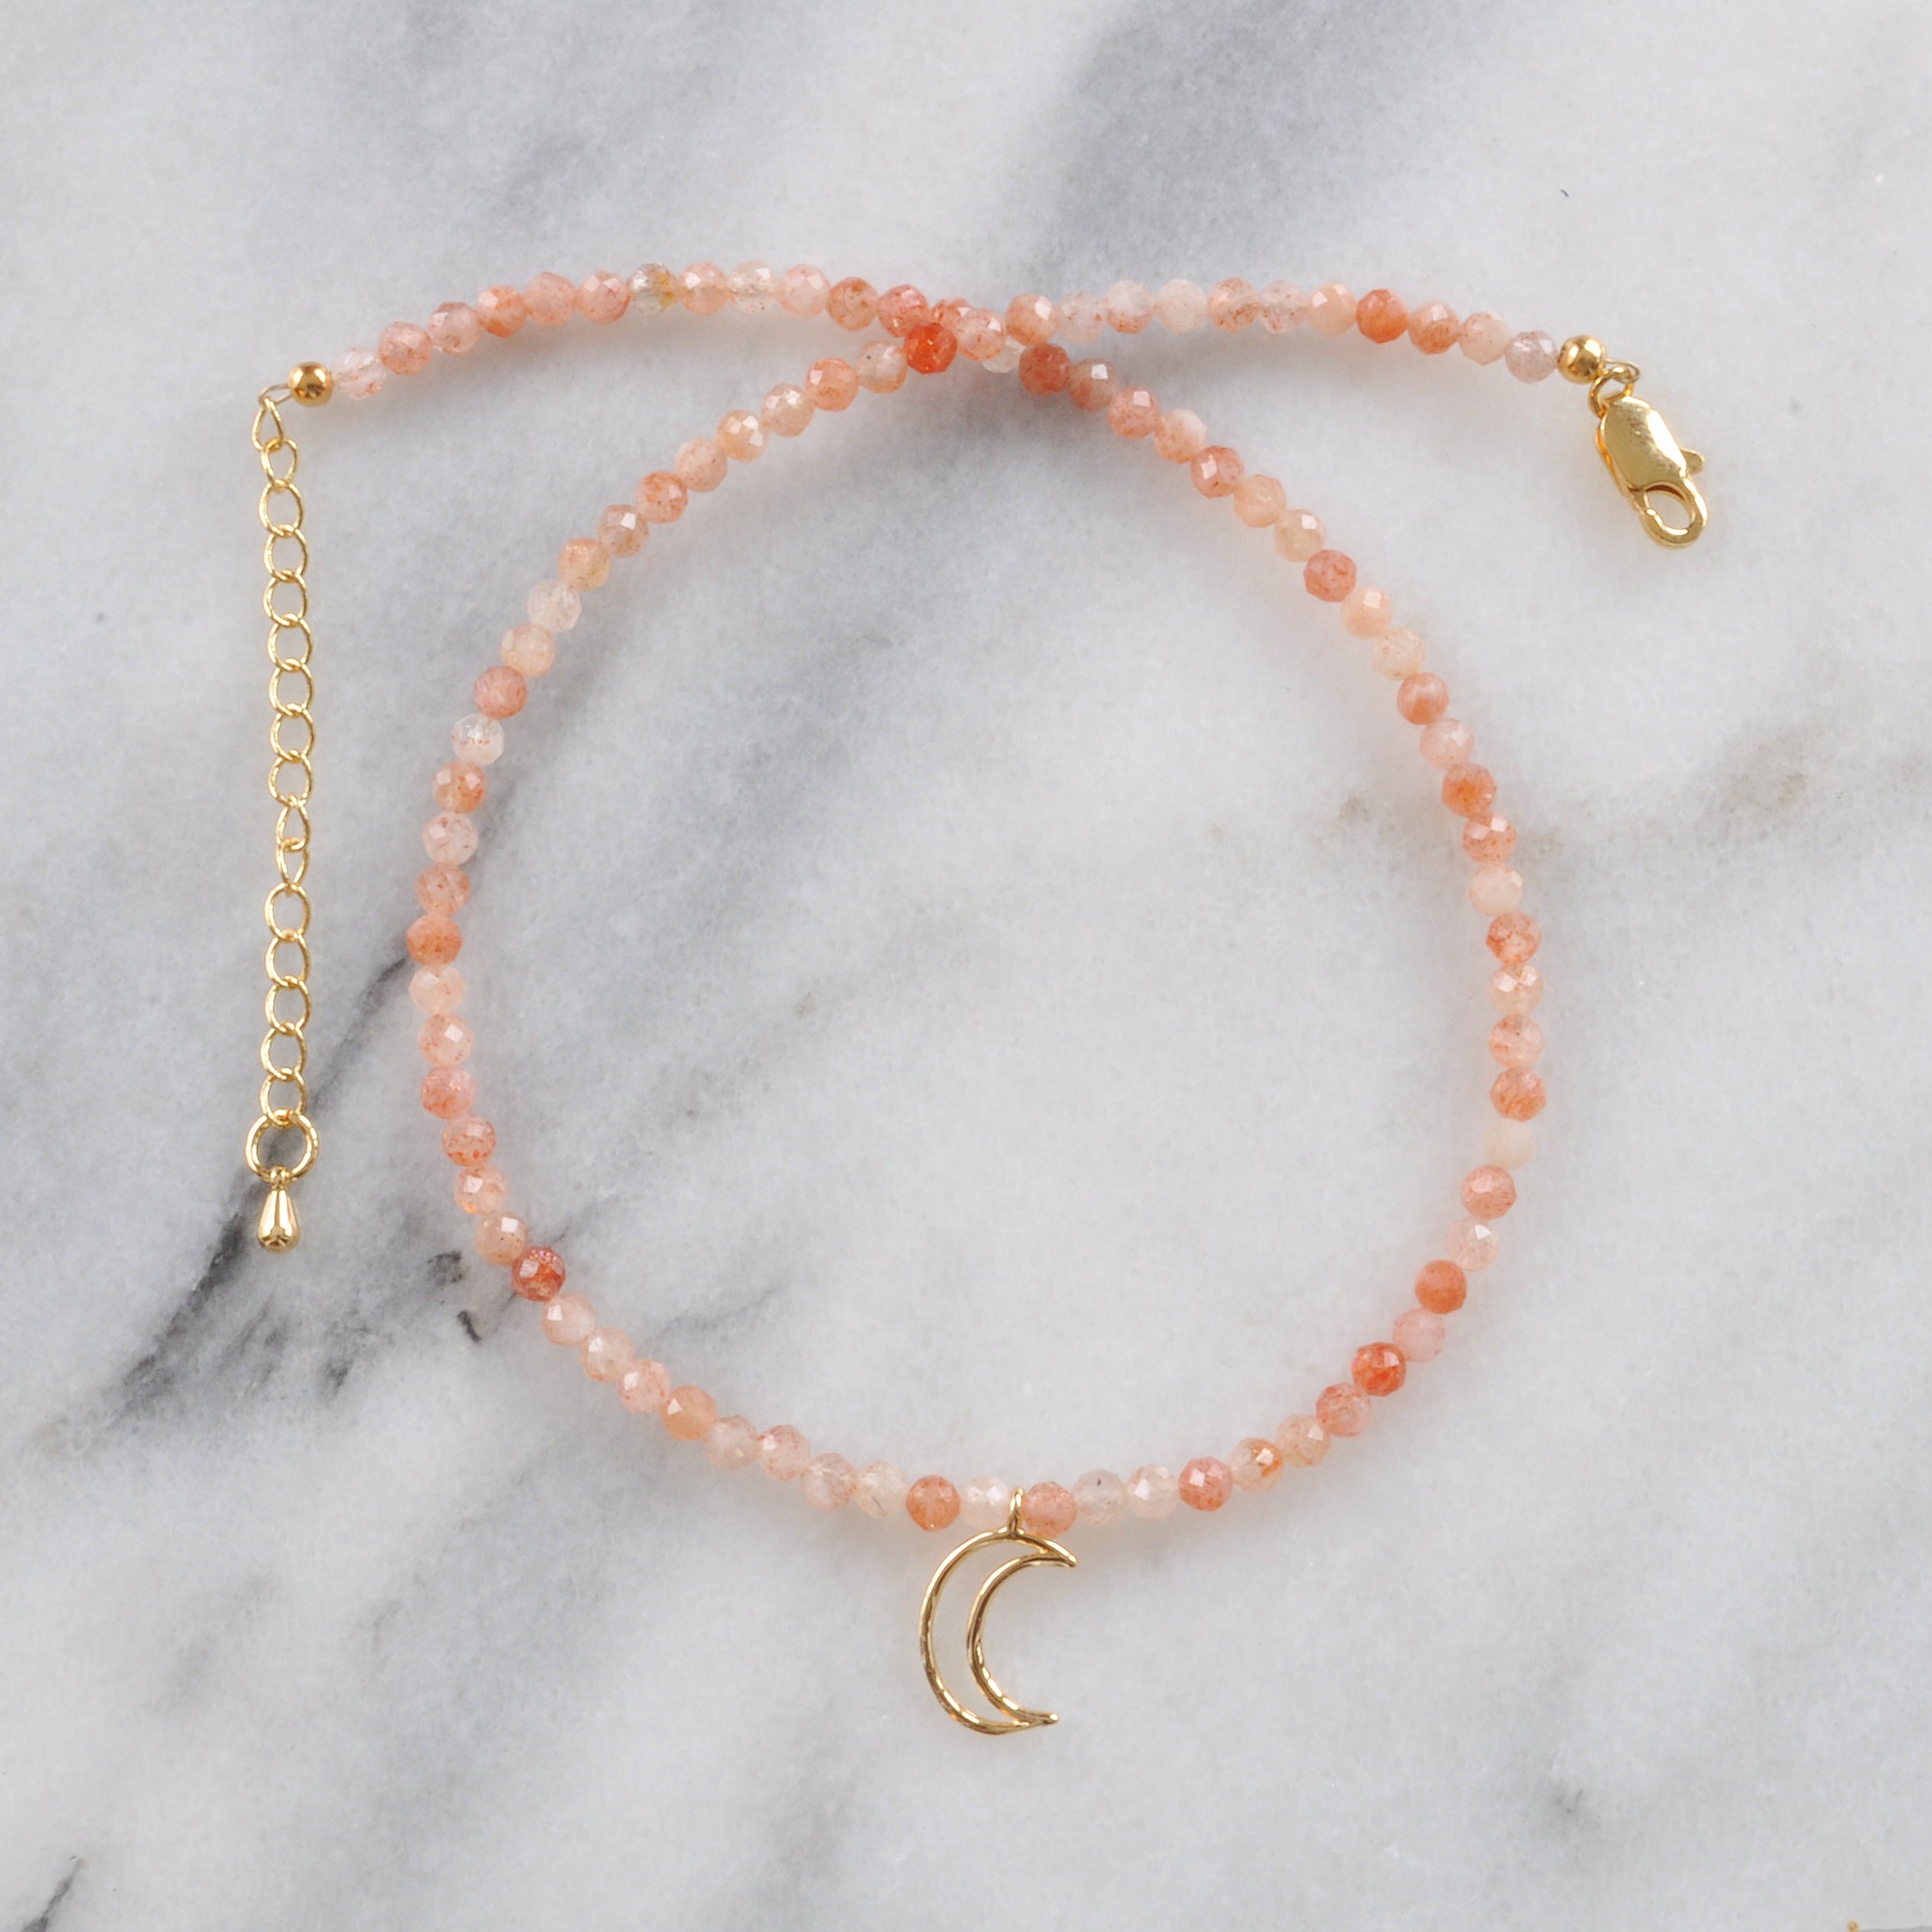 Moonstone Gemstone Choker Necklace with Gold Moon Charm